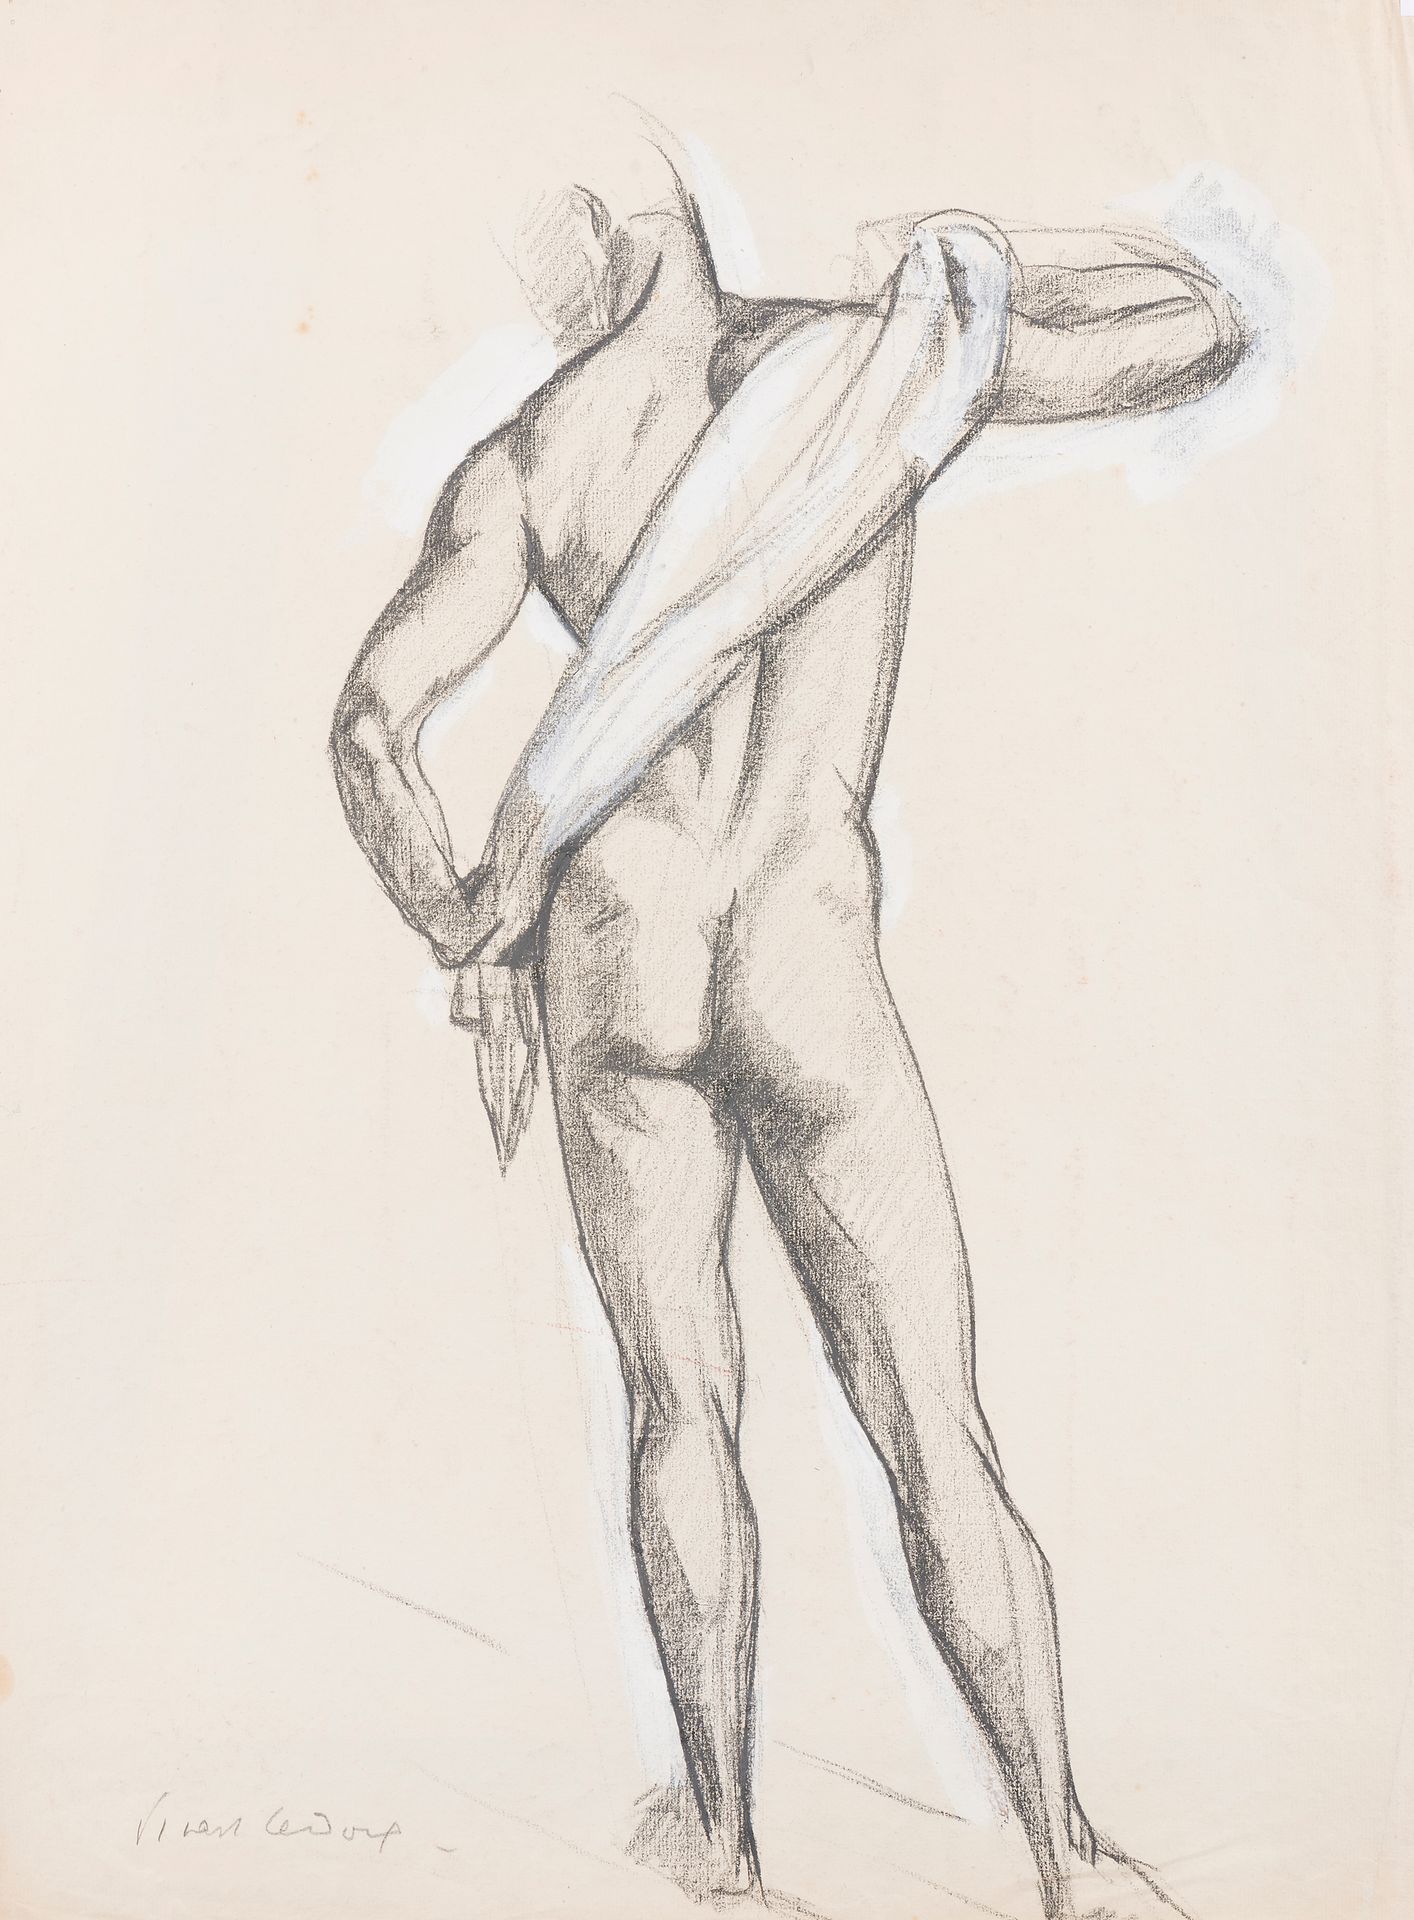 Null Charles PICART LE DOUX (1881-1959)
Uomo nudo di spalle, 1946
Carboncino e g&hellip;